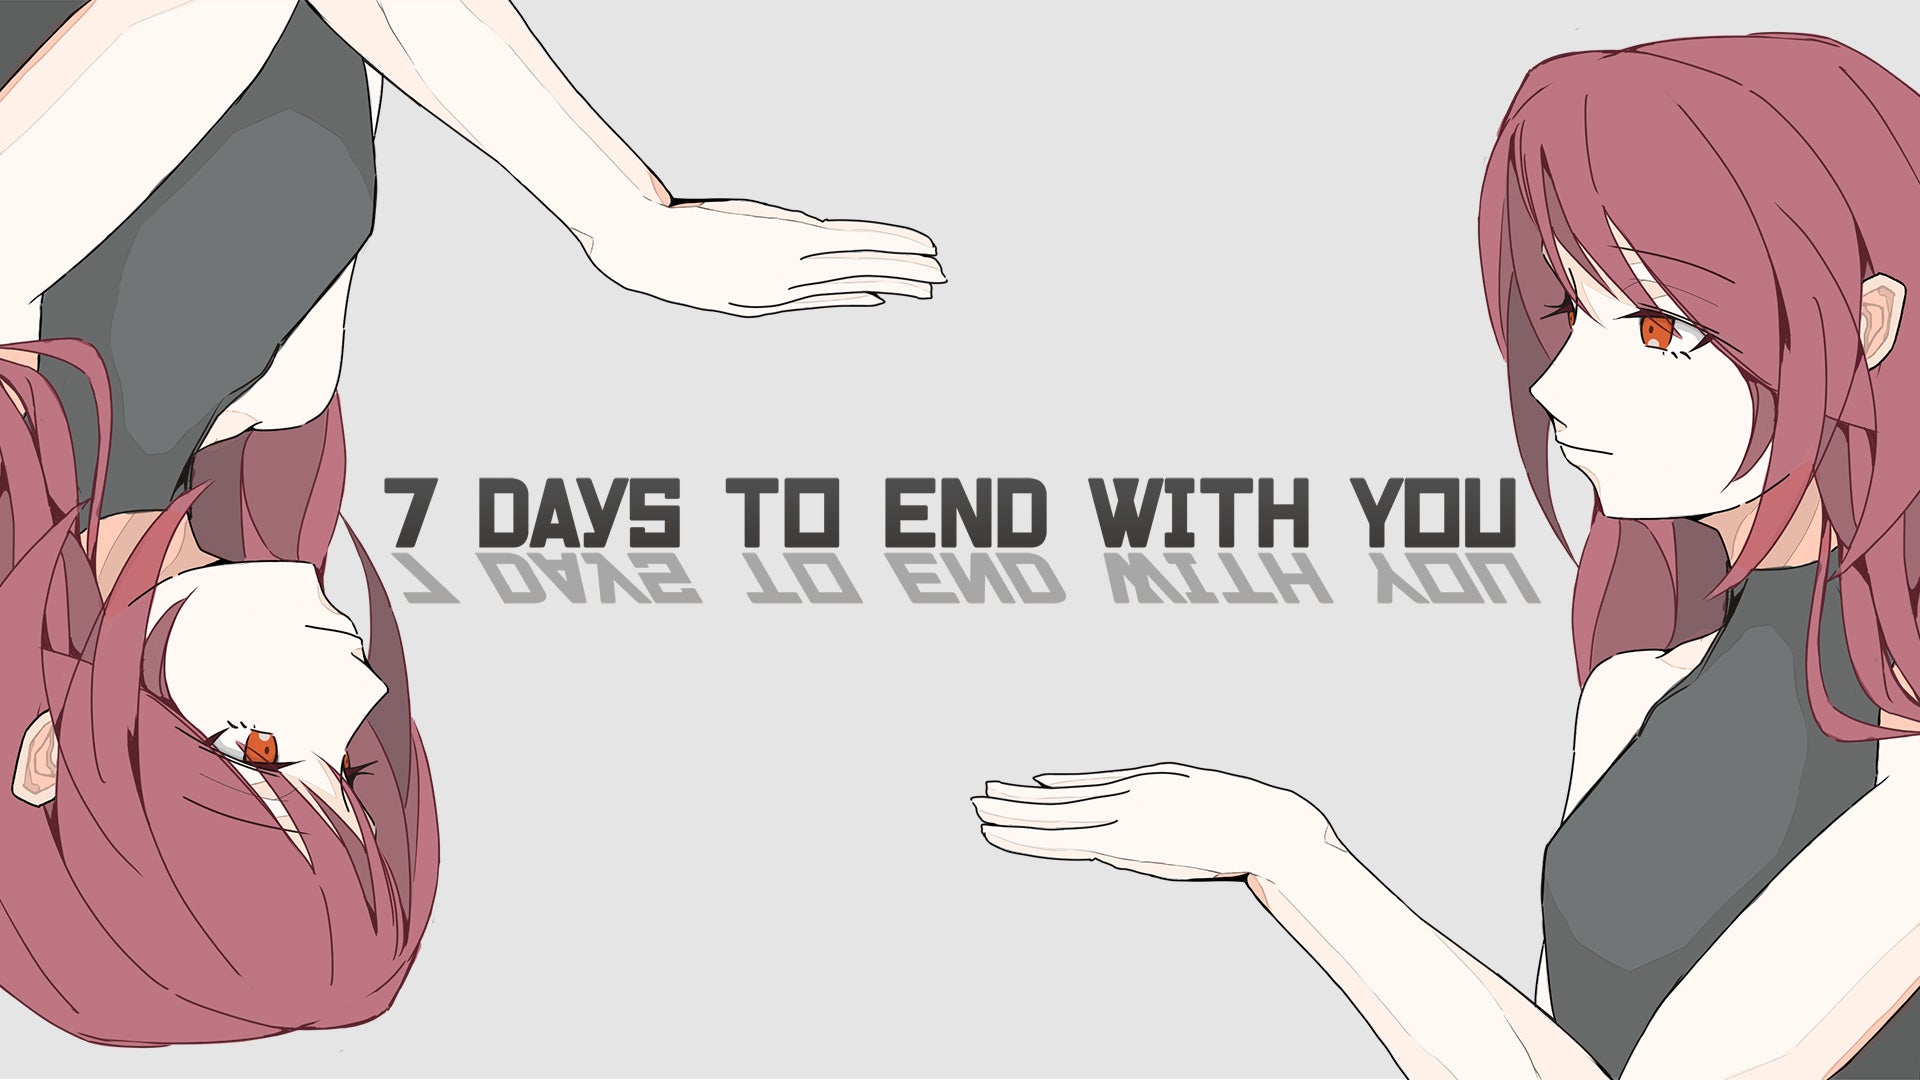 7 Days to End with You 赤い髪の人アクリルスタンド